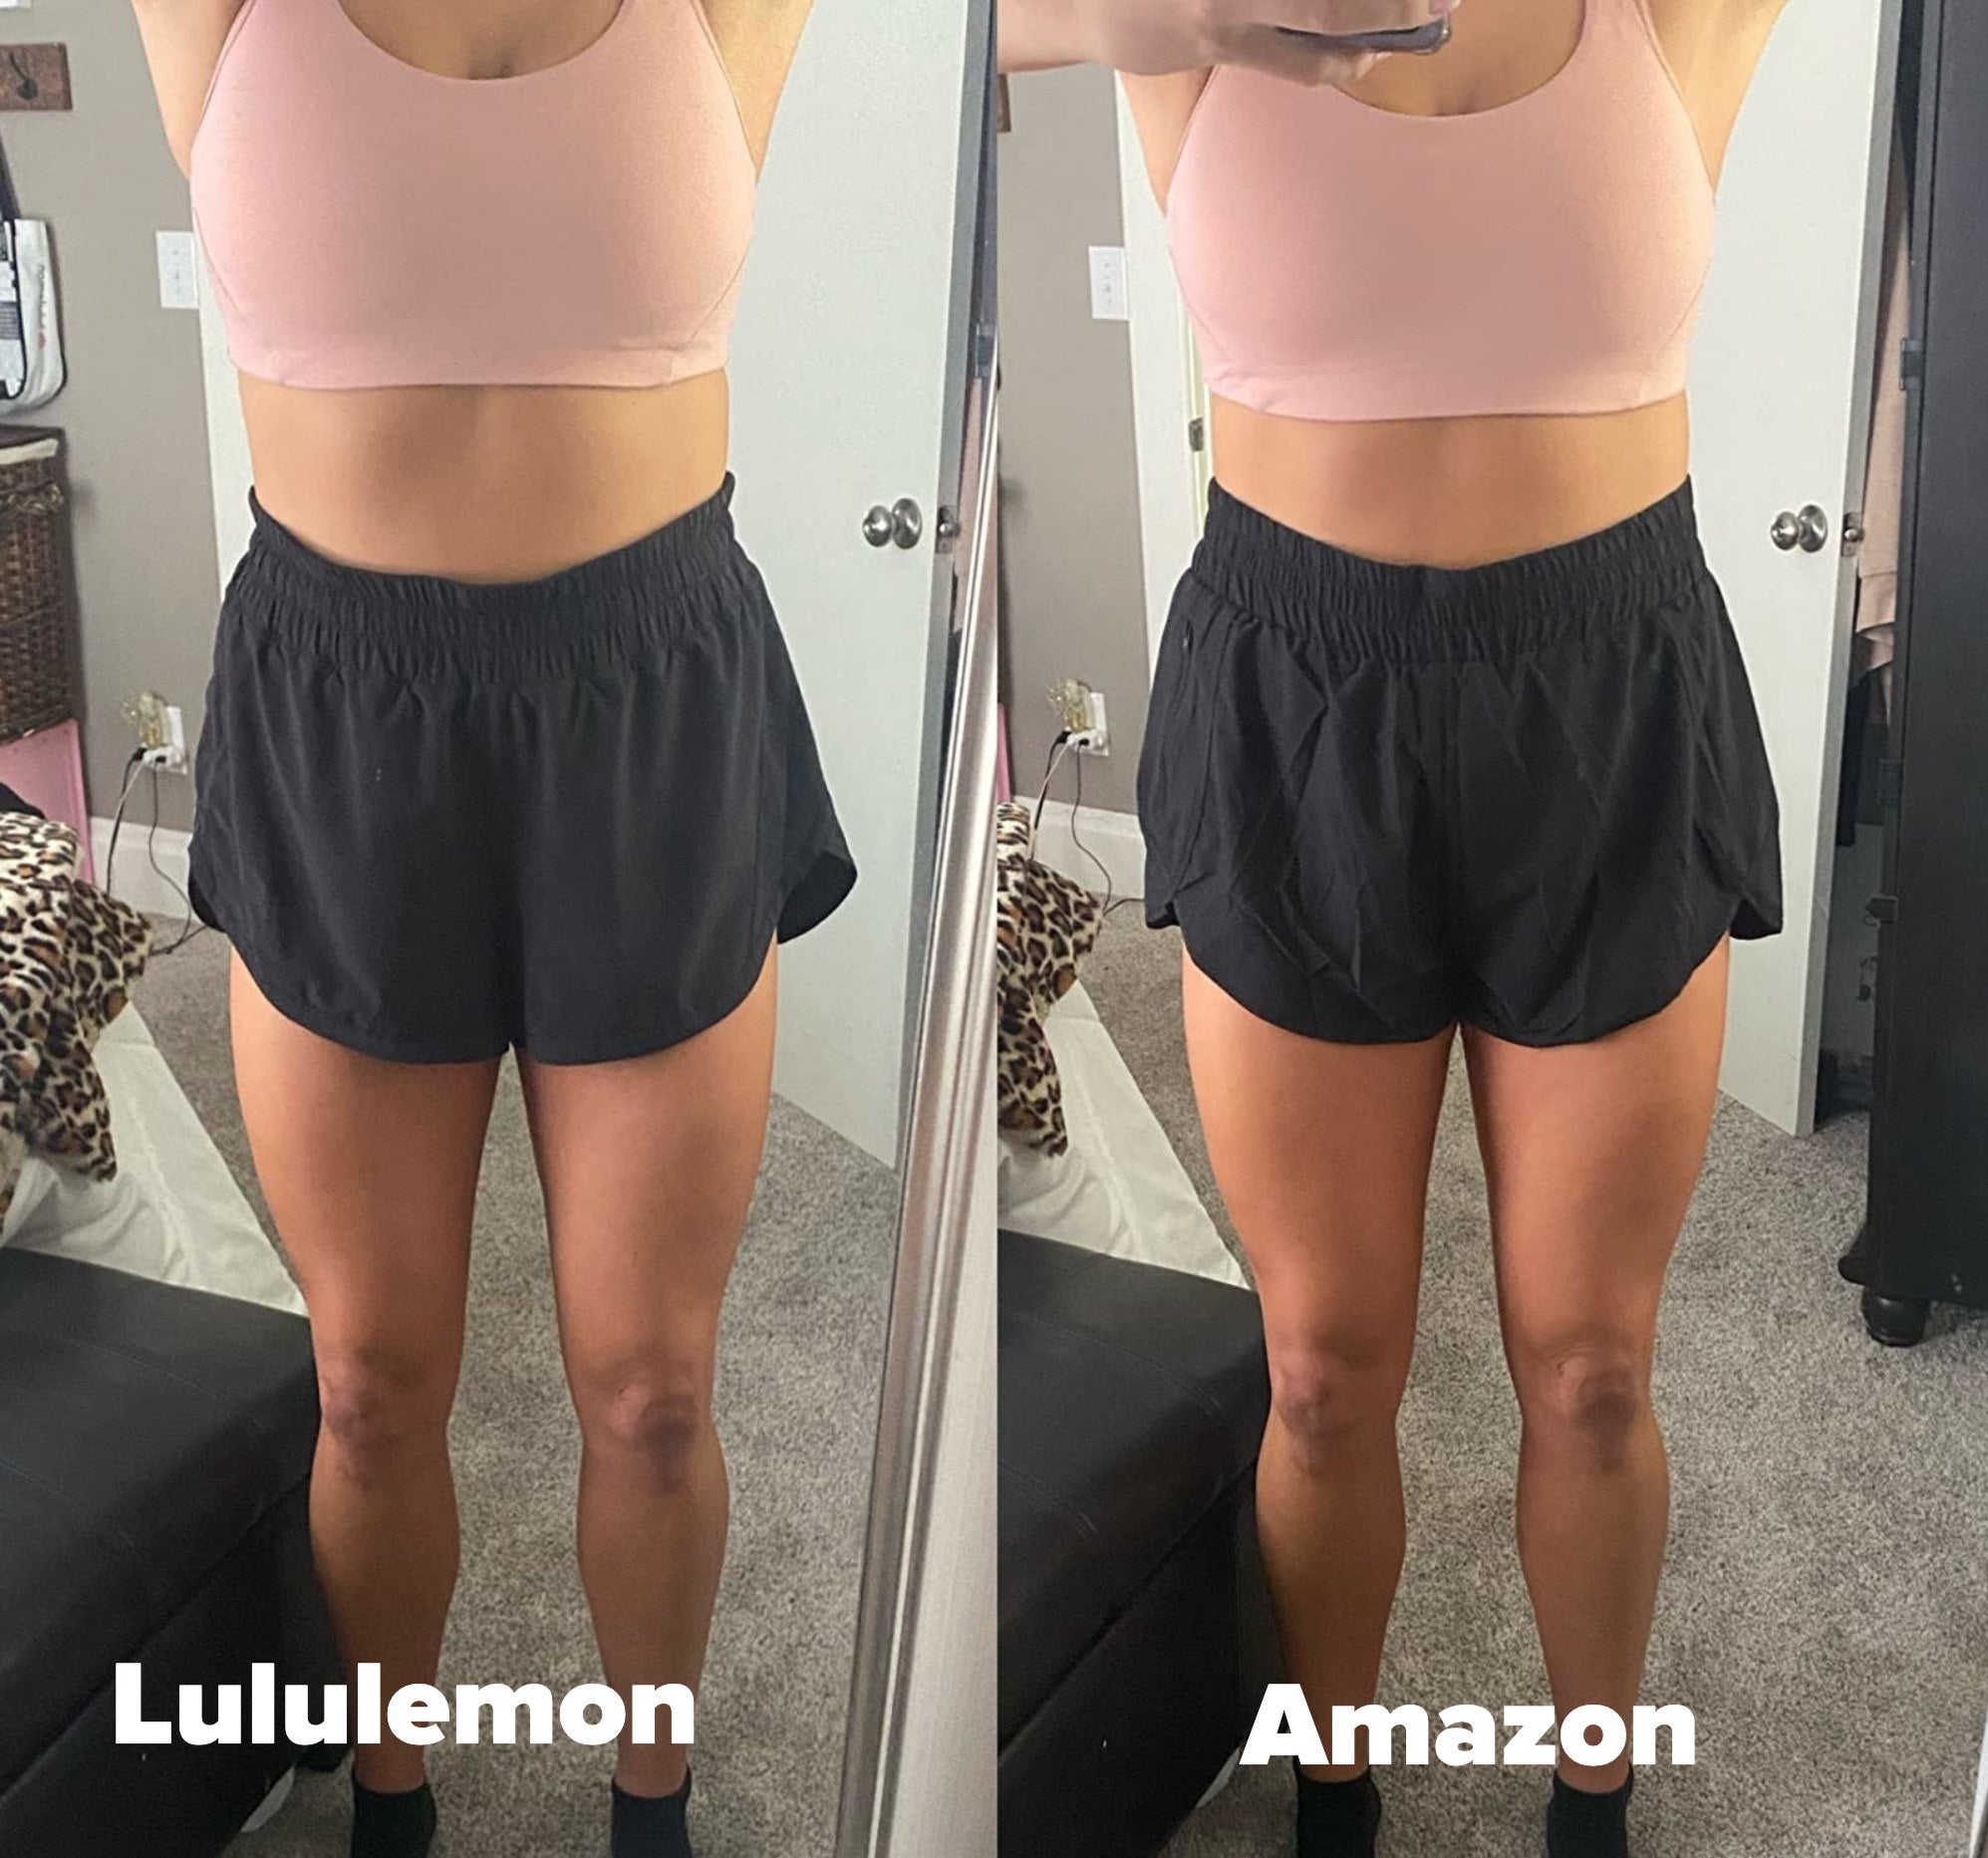 Reviewer&#x27;s side by side showing lululemon high waisted shorts on left and nearly identical Amazon shorts on the right